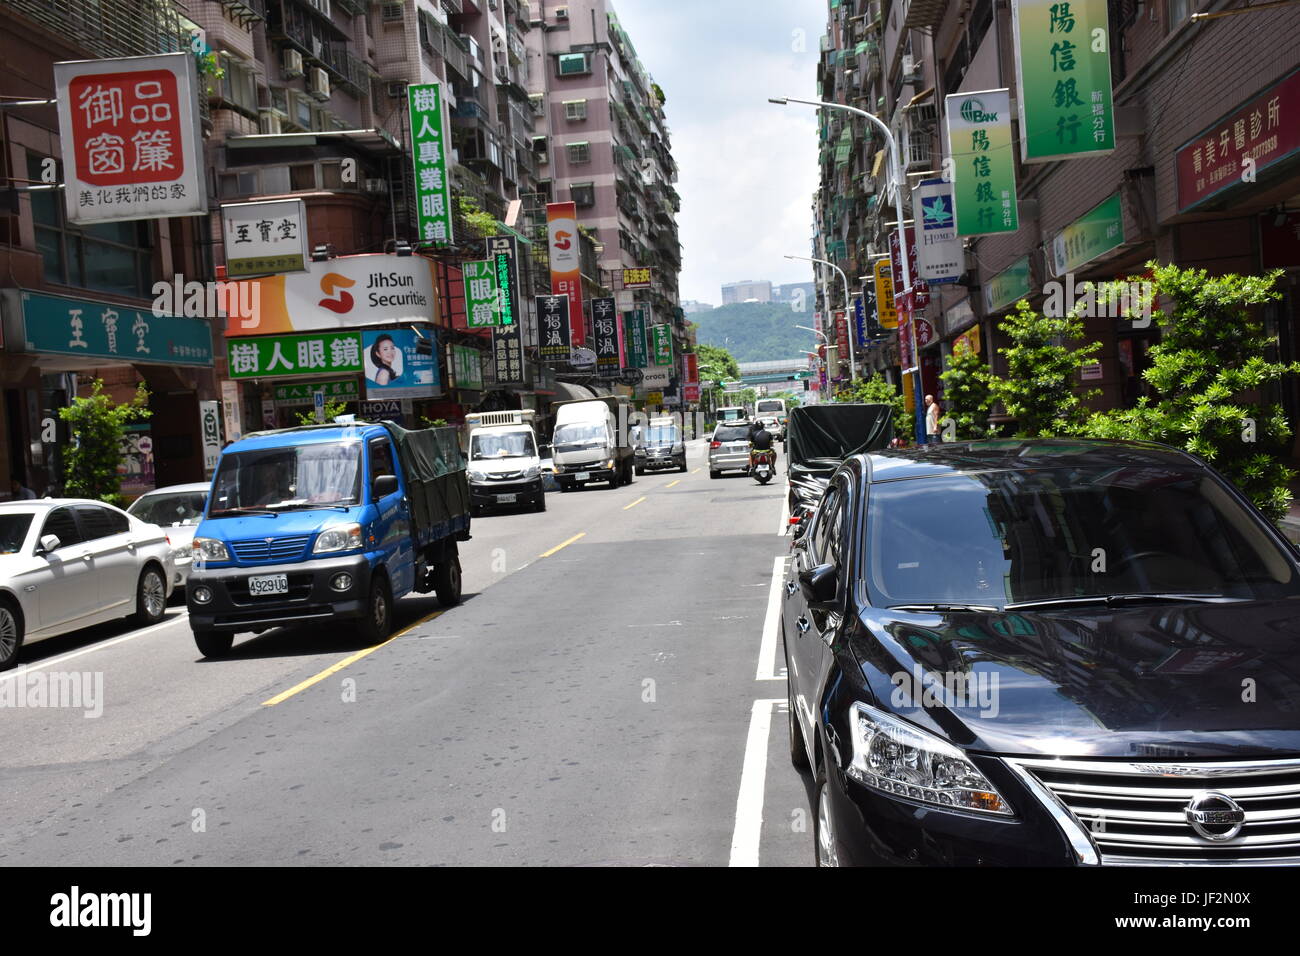 A typical street in Taiwan, called Shin Fa road, which is the main street of New Taipei City. Stock Photo